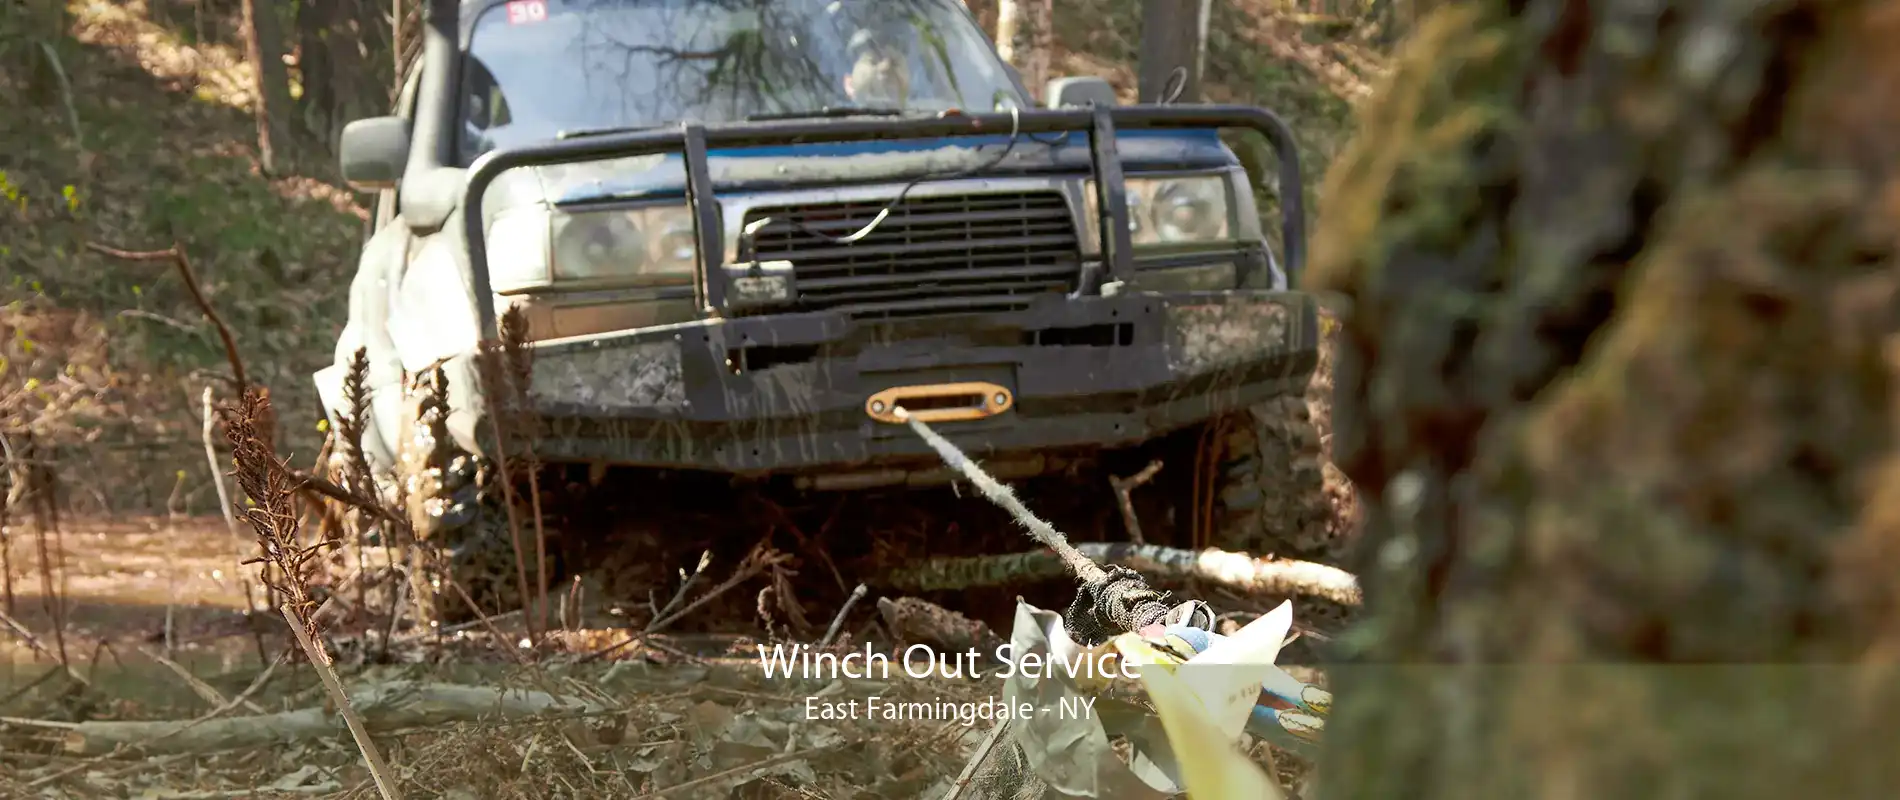 Winch Out Service East Farmingdale - NY